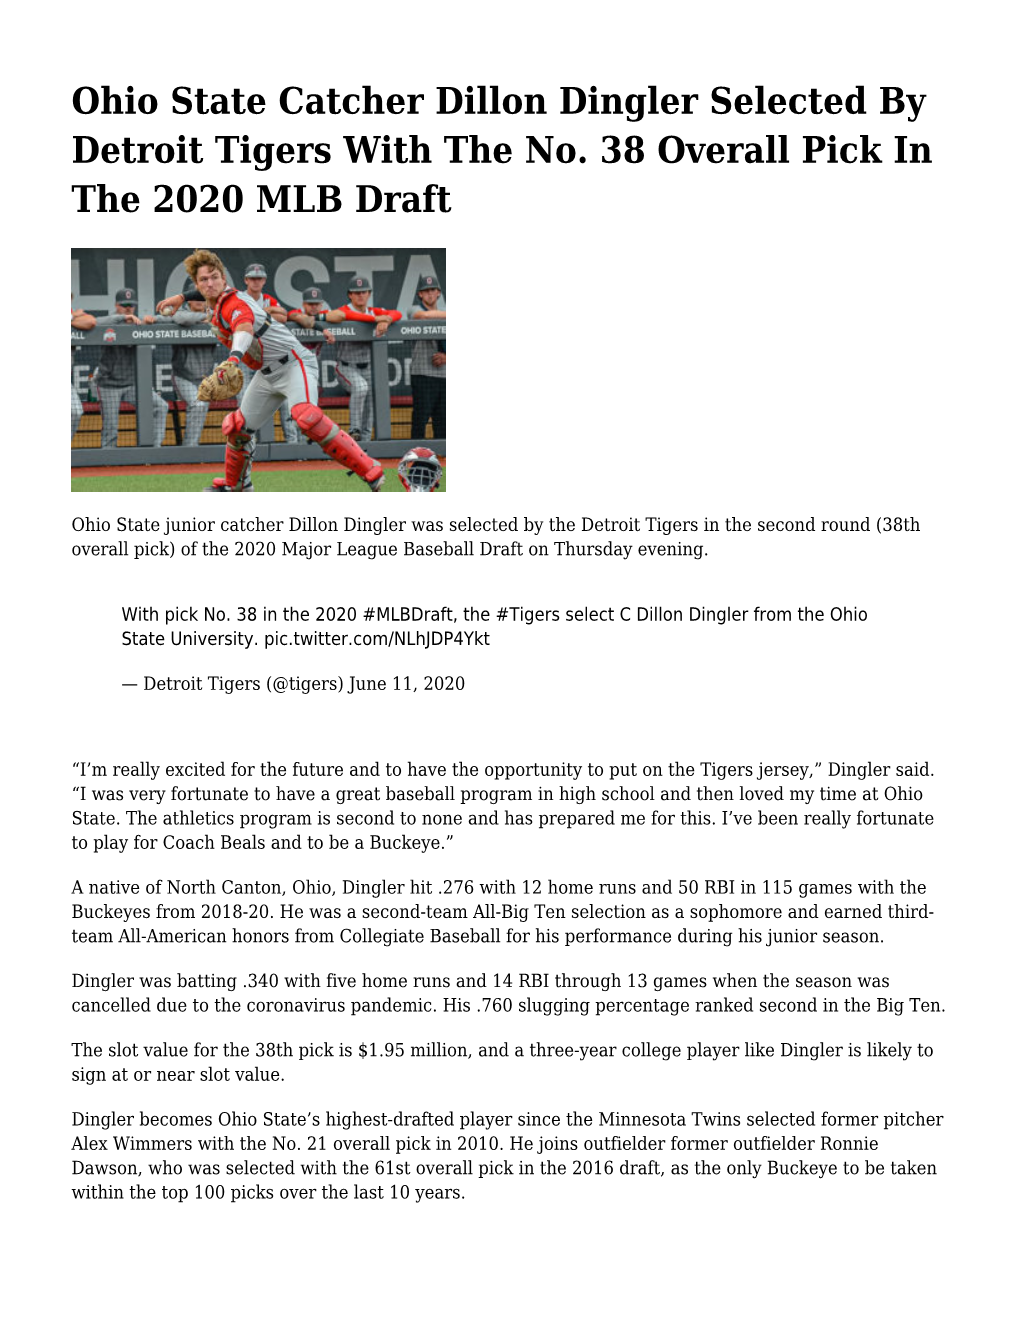 Ohio State Catcher Dillon Dingler Selected by Detroit Tigers with the No